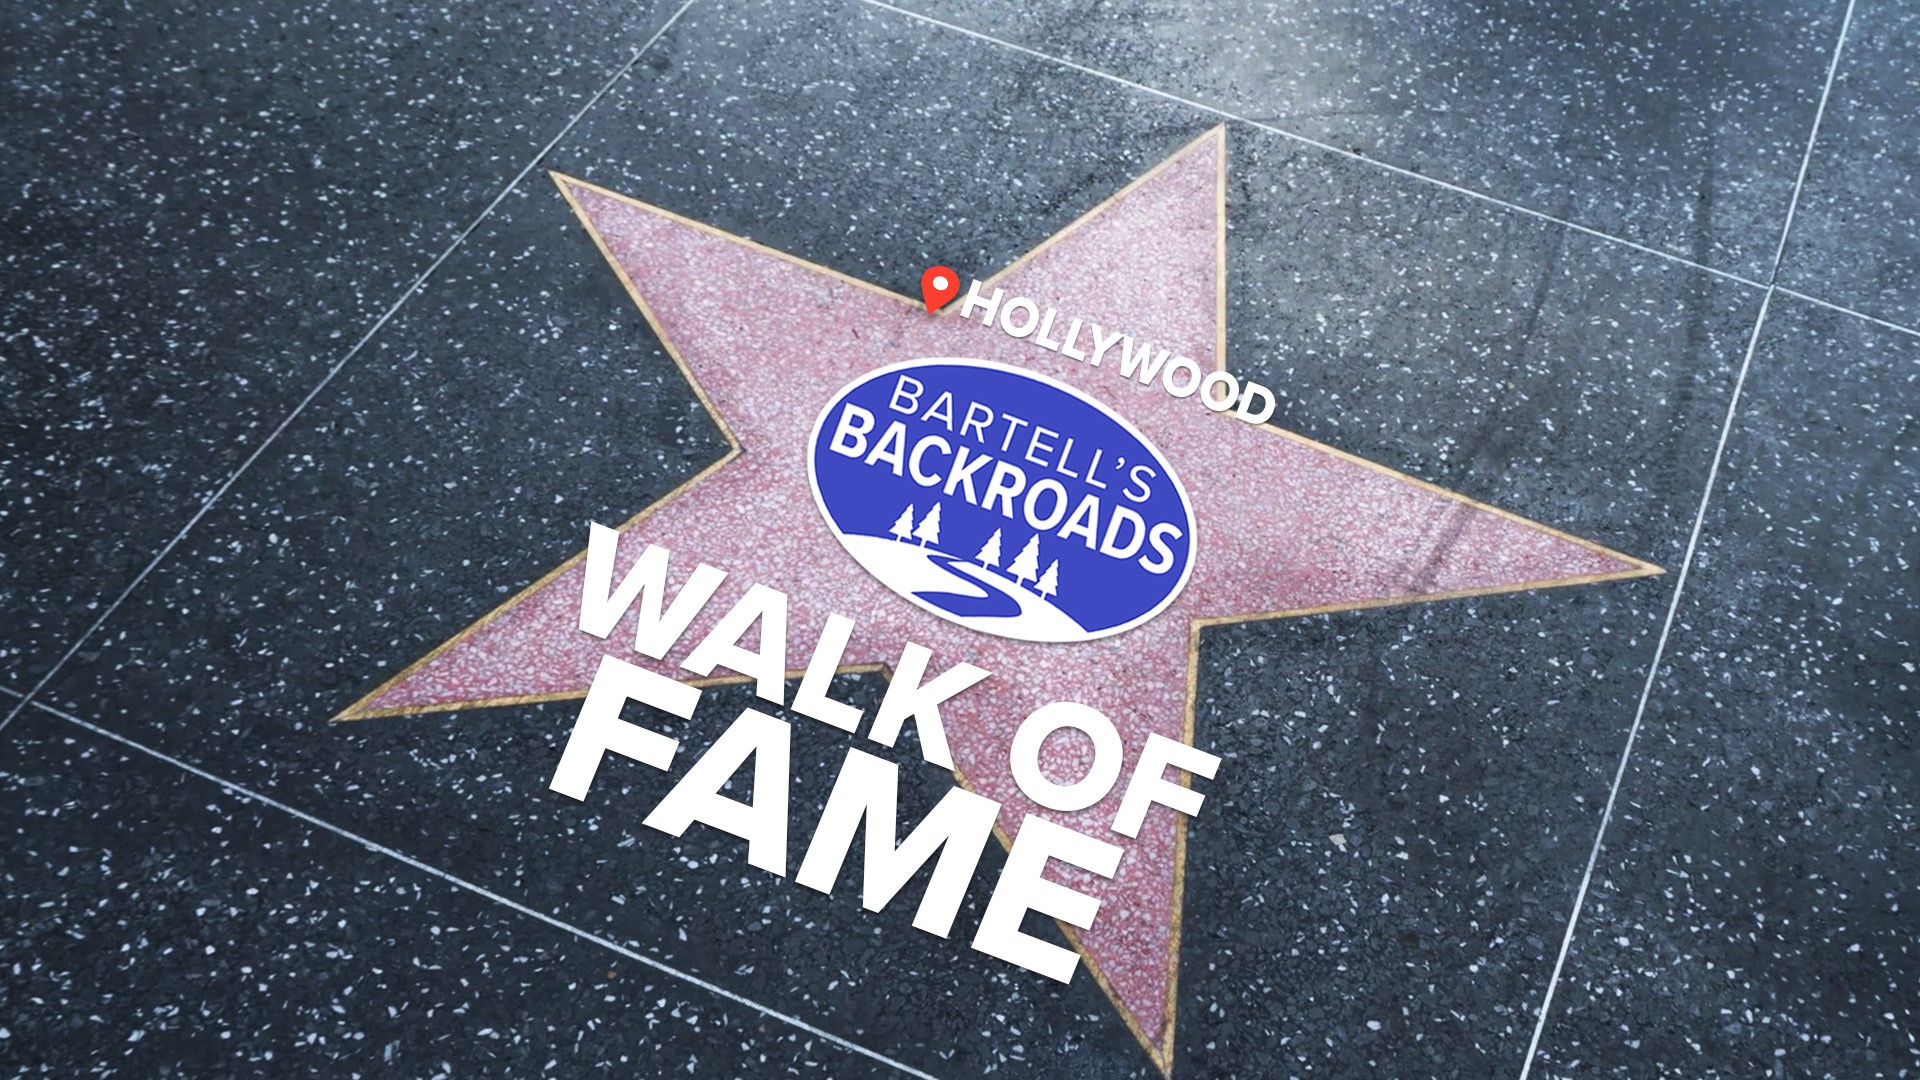 Here's how to get your favorite star a spot on the Hollywood Walk of Fame.